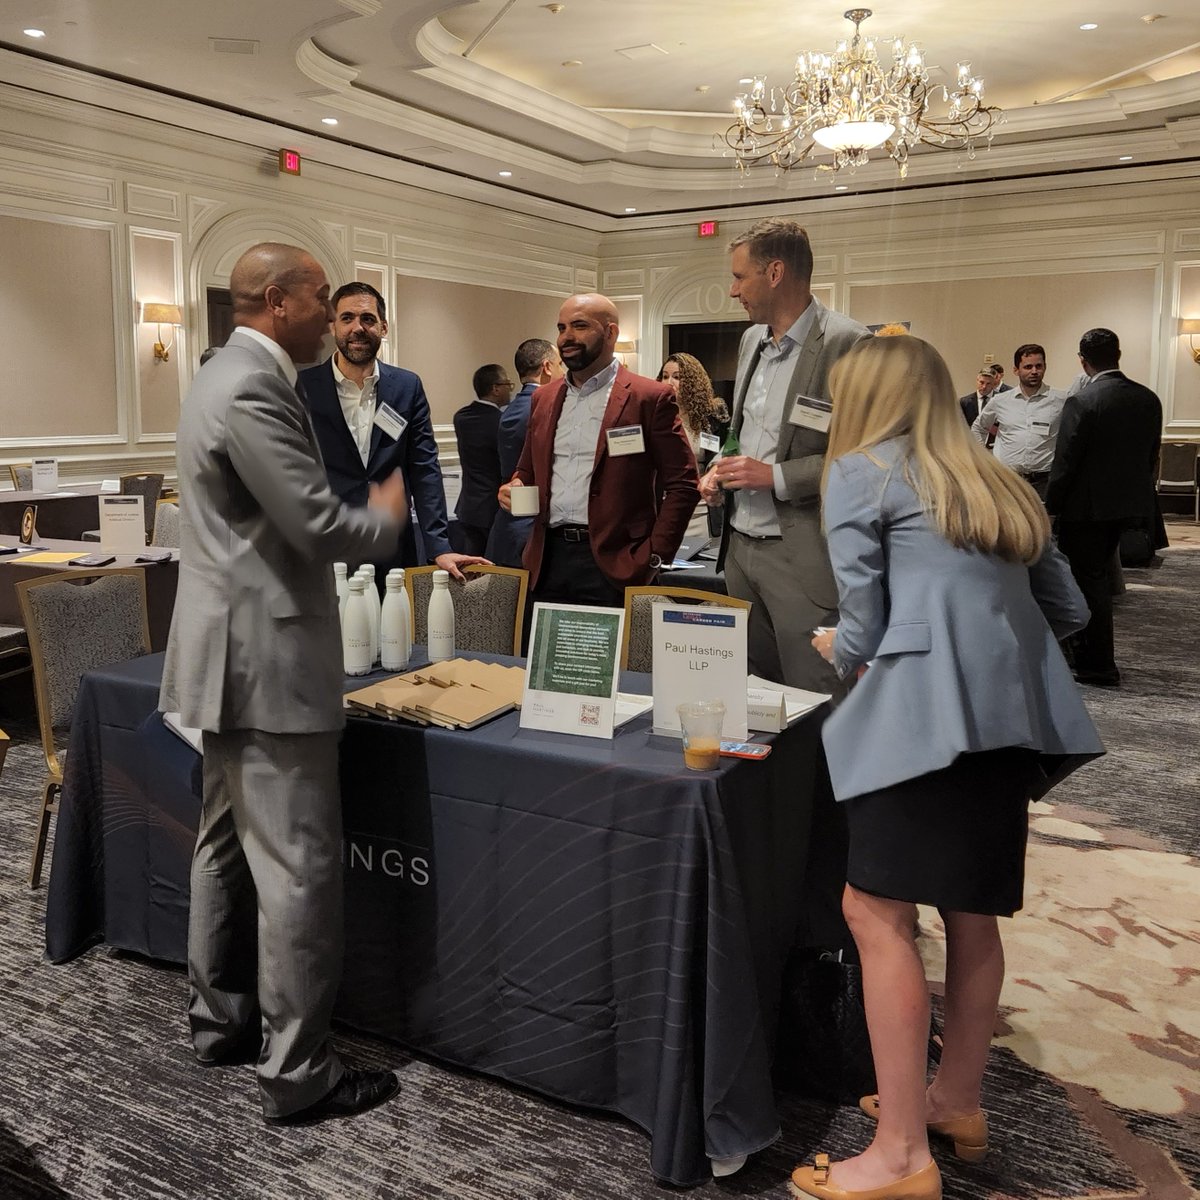 test Twitter Media - Our open career fair is underway now, featuring plenty of opportunities for #veterans and #milspouses to network with top legal employers. #VLCF22 https://t.co/kW3LXDyR7n